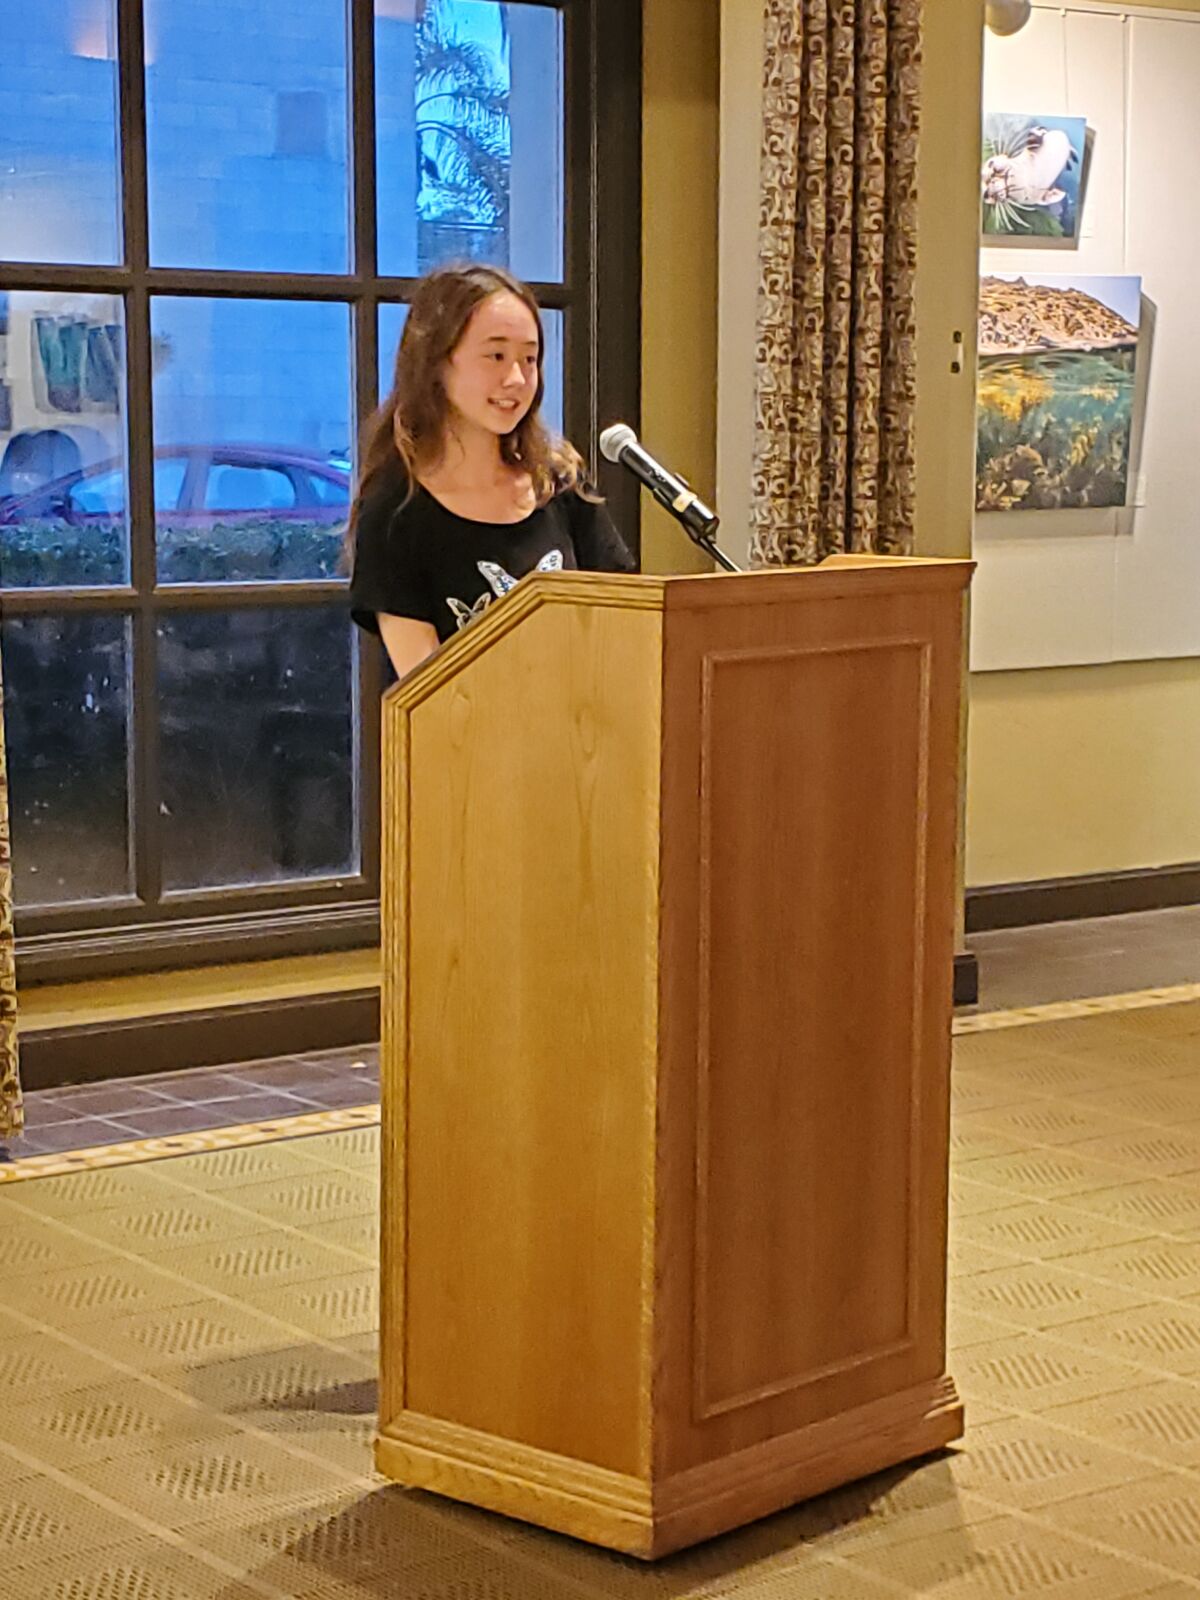 La Jolla High student Arianna Roberts speaks during the Nov. 20 Pitch Your Passion event at the La Jolla/Riford Library.